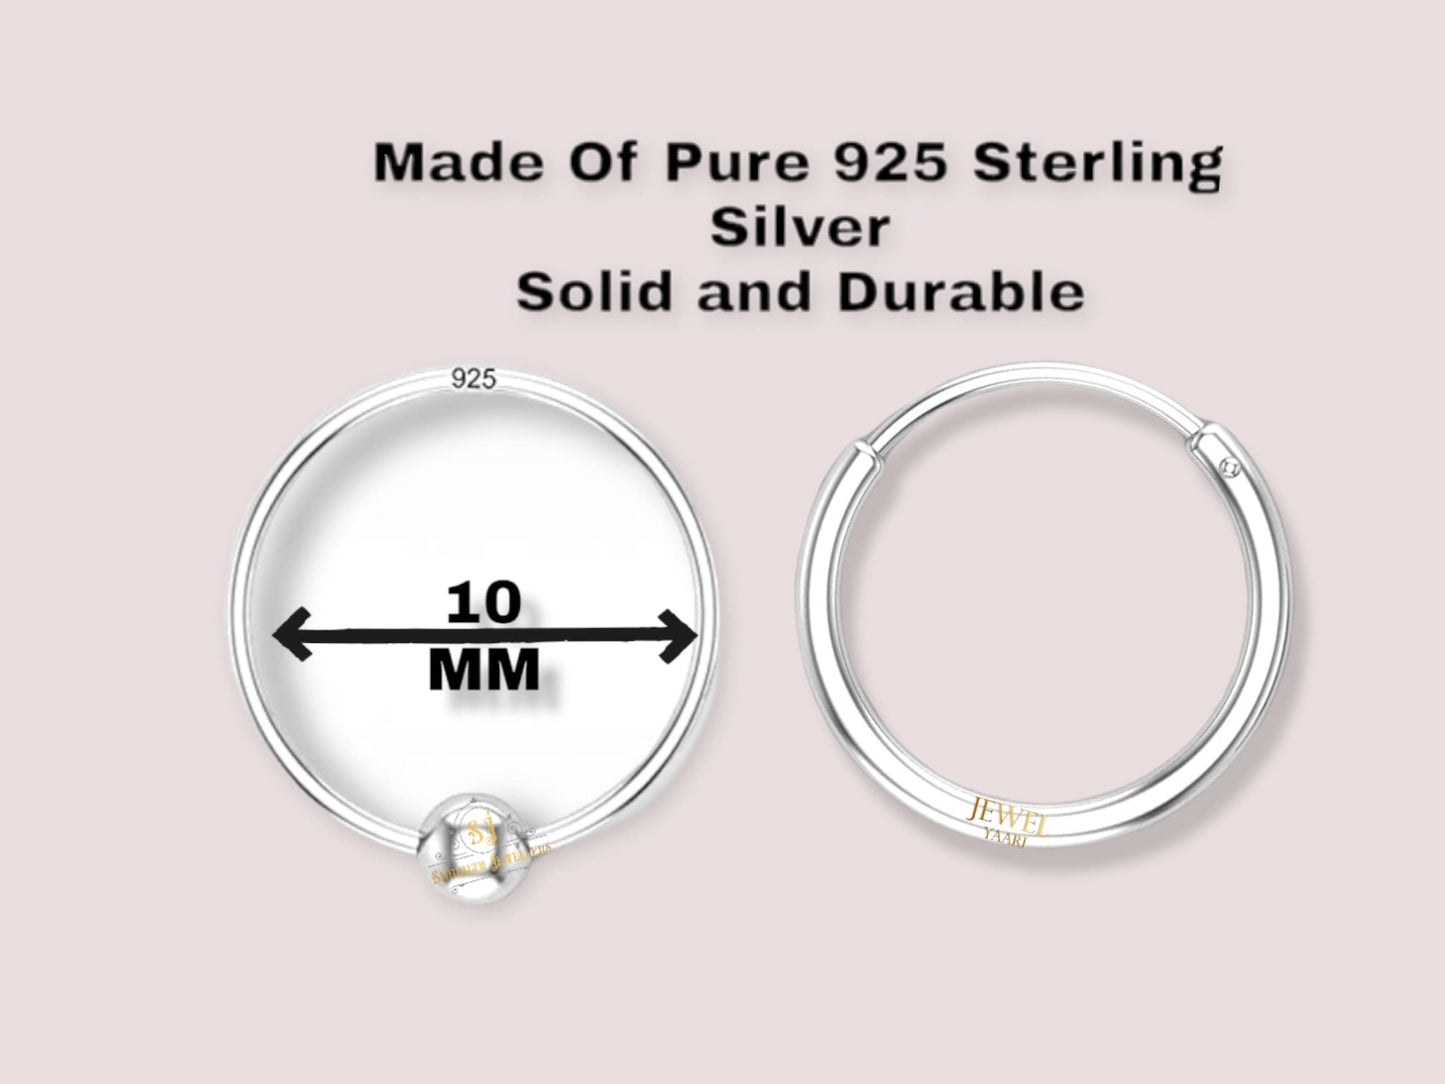 SJ SHUBHAM JEWELLERS™ Tiny Hoop and Septum Nose Ring One Piece/Combo/Gold 18K 750/925 Sterling Silver Simple & Beautiful Nose Pin For Women & Girls